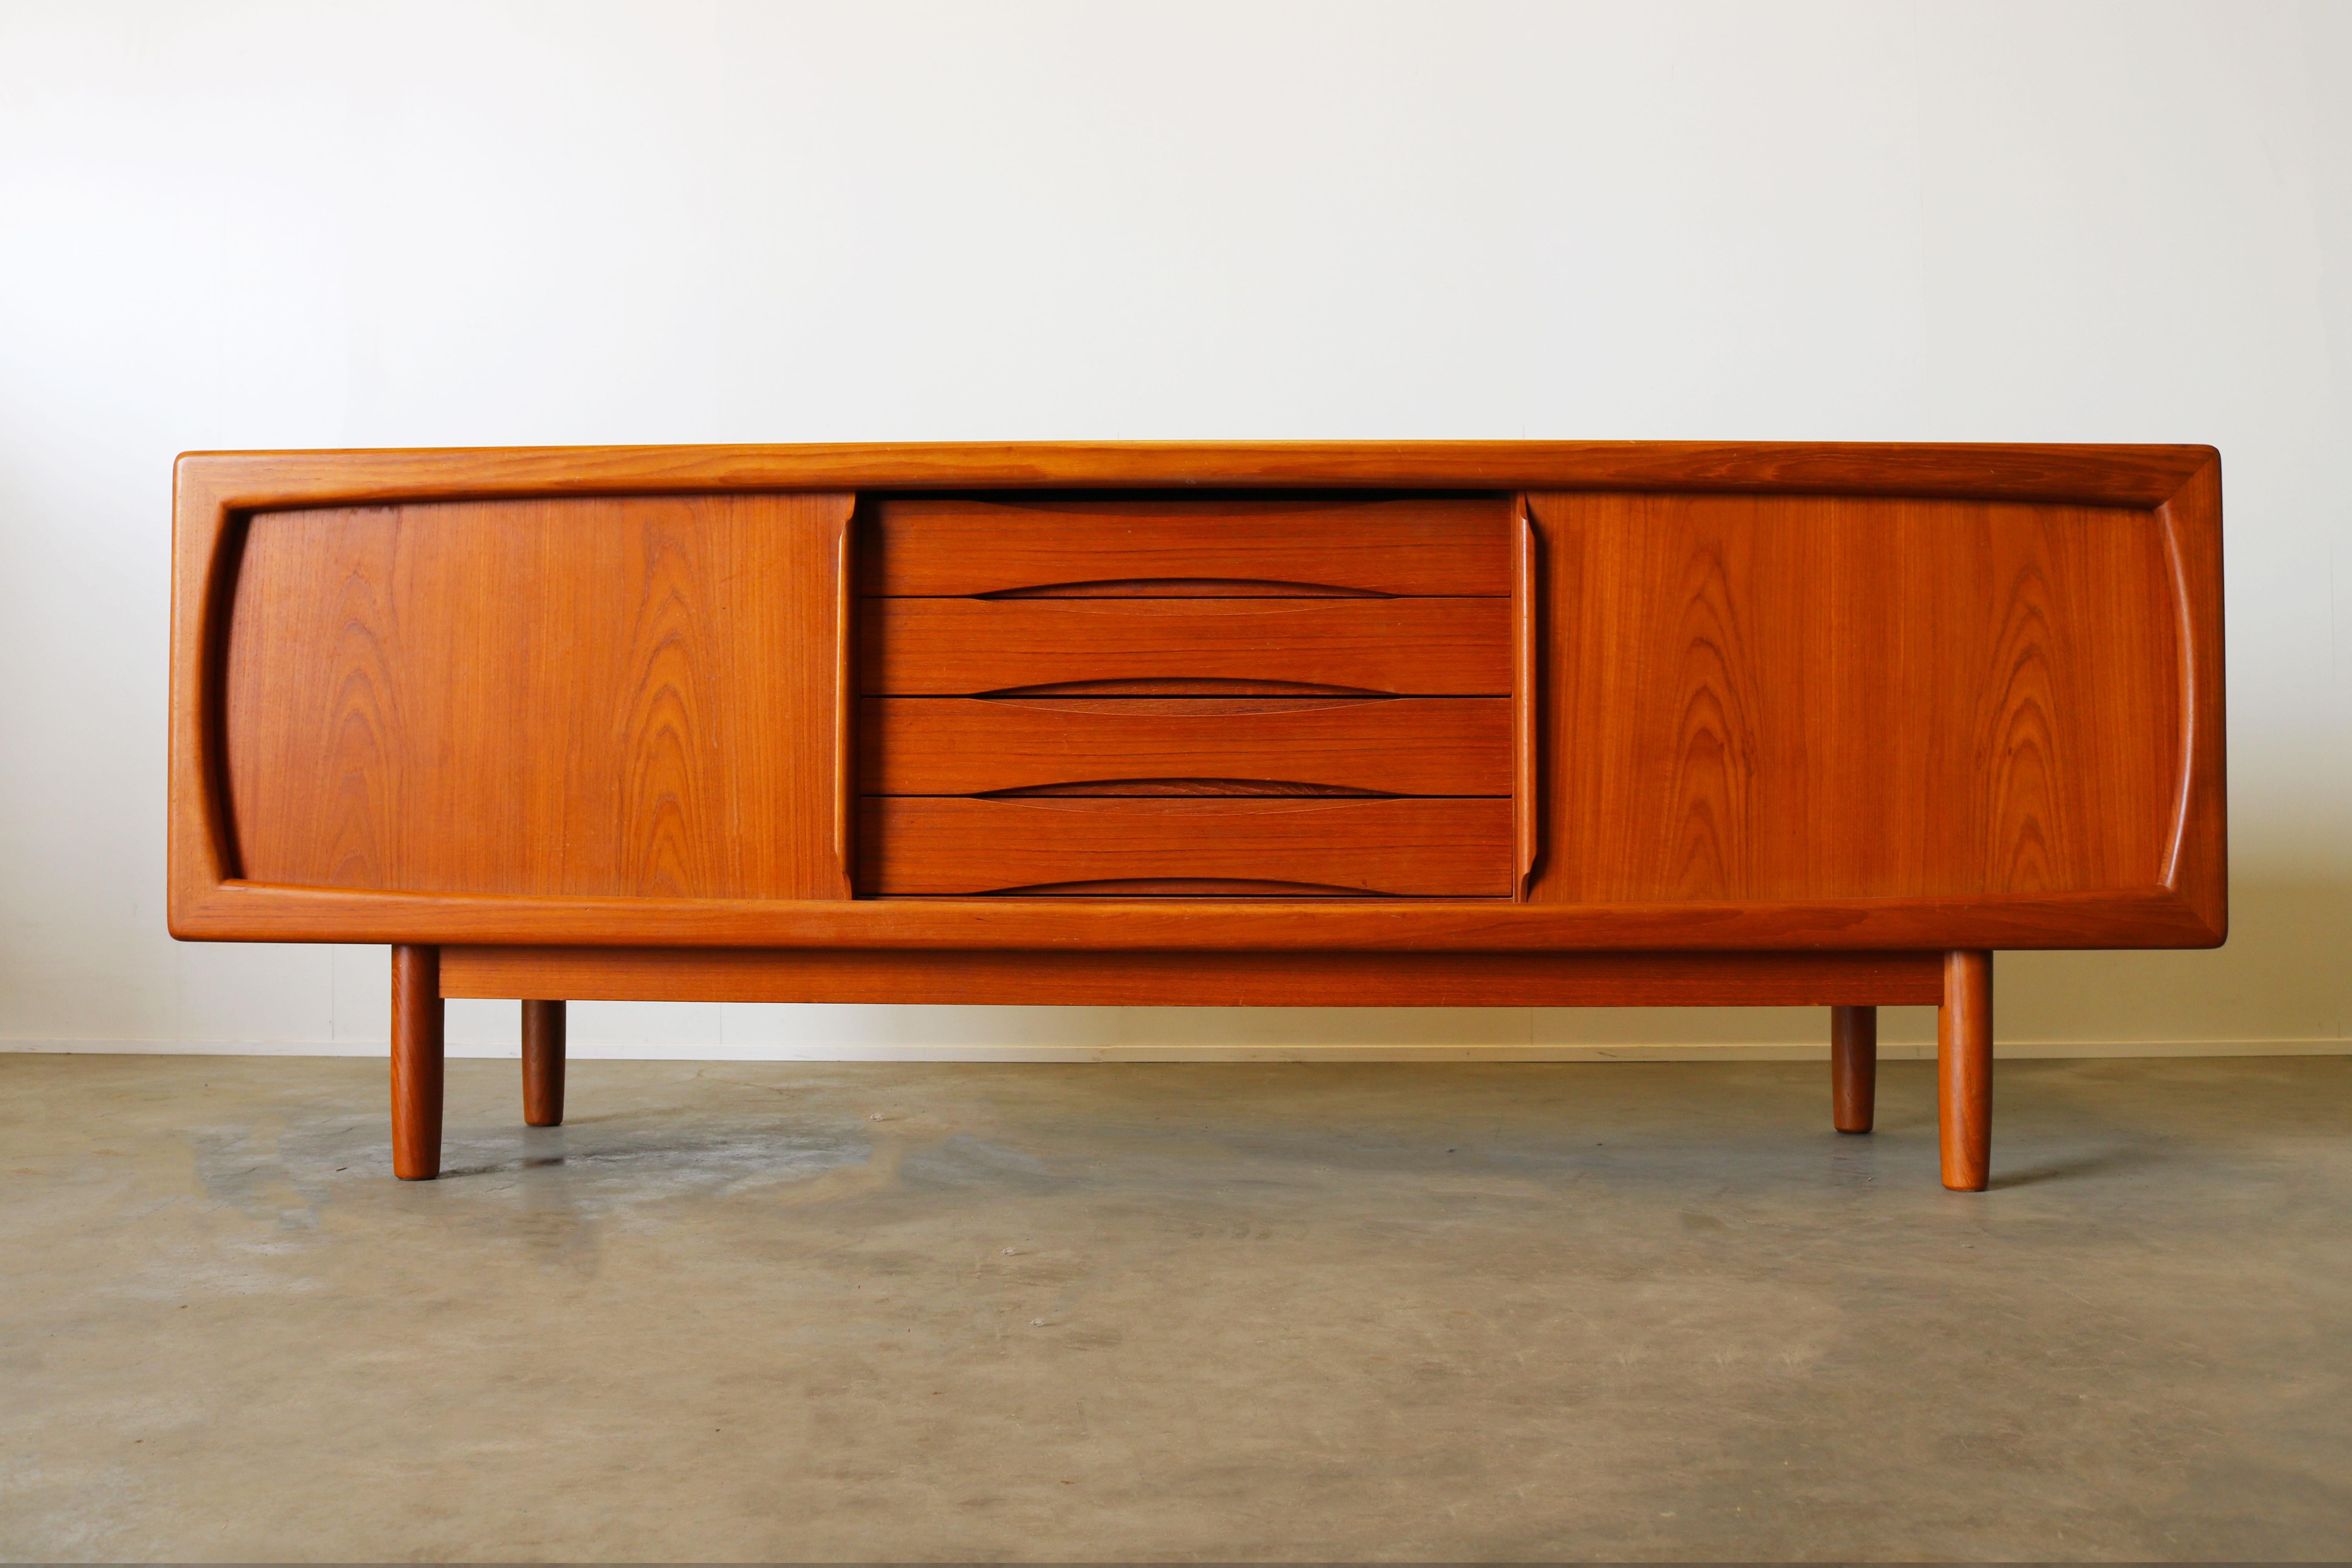 Magnificent Danish design sideboard or credenza designed by H.P. Hansen in the 1950s. The sideboard is made from solid teak and has four uniquely shaped drawers and two sliding doors. The sideboard is of high quality and in nice vintage condition.